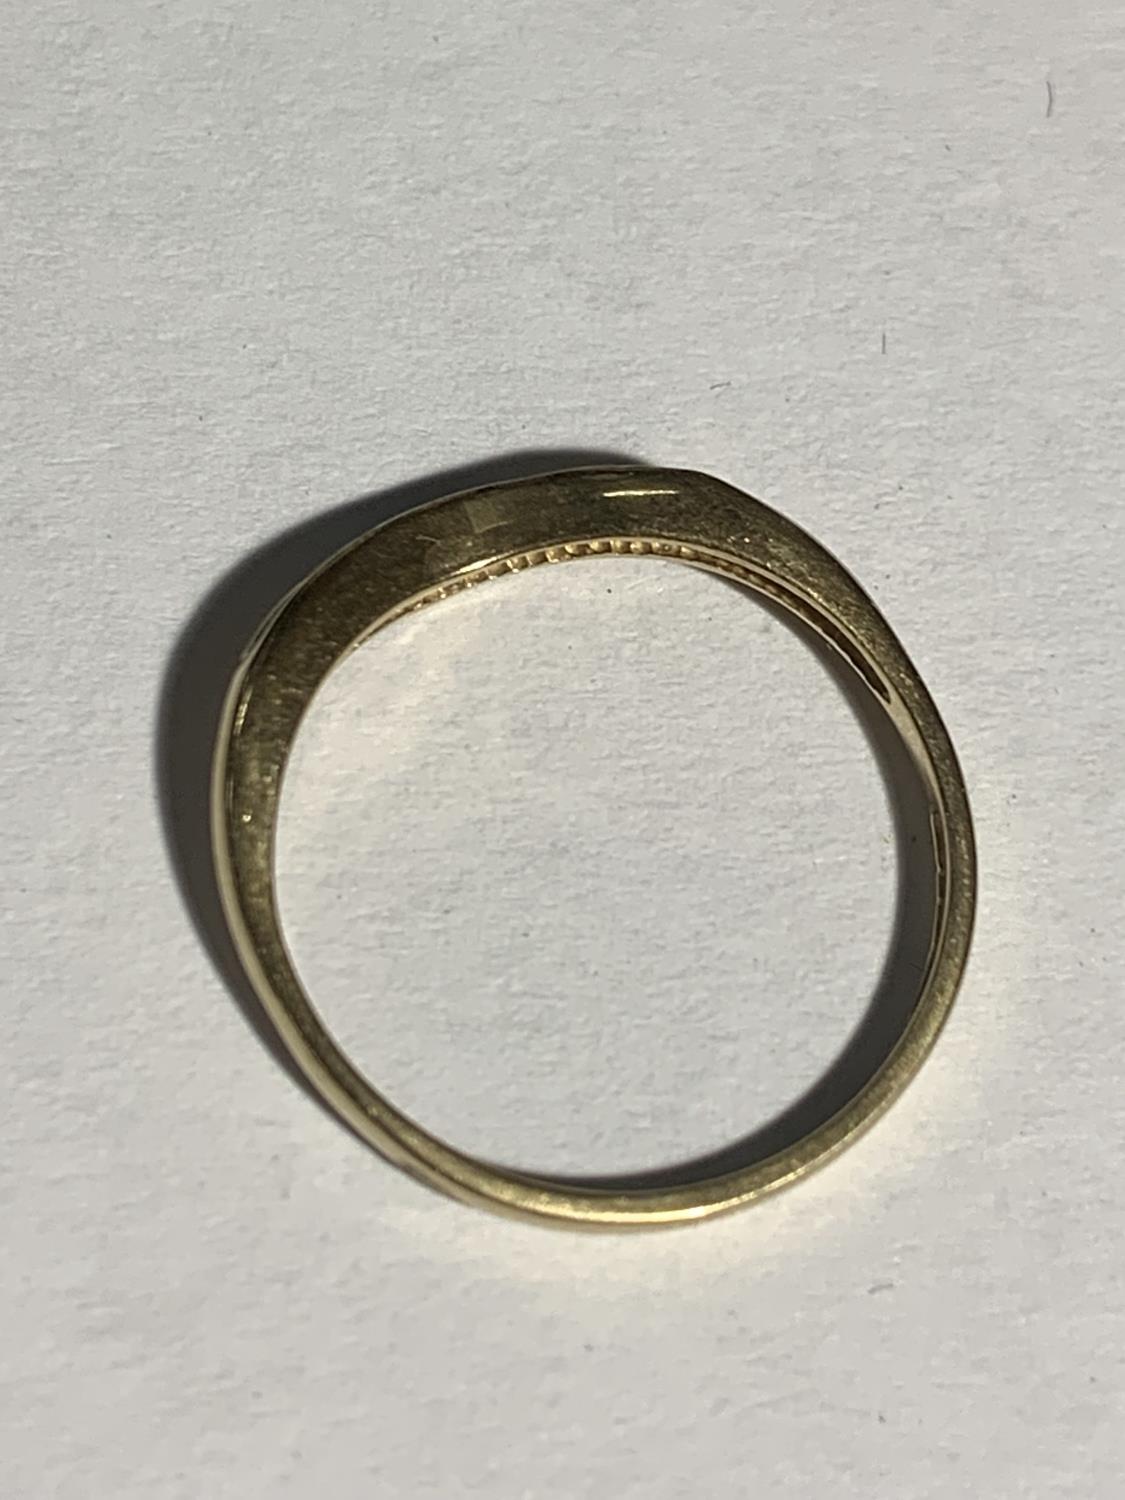 A 9 CARAT GOLD RING IN A WISHBONE DESIGN WITH CLEAR STONES POSSIBLY DIAMONDS SIZE N/O GROSS WEIGHT - Image 3 of 3